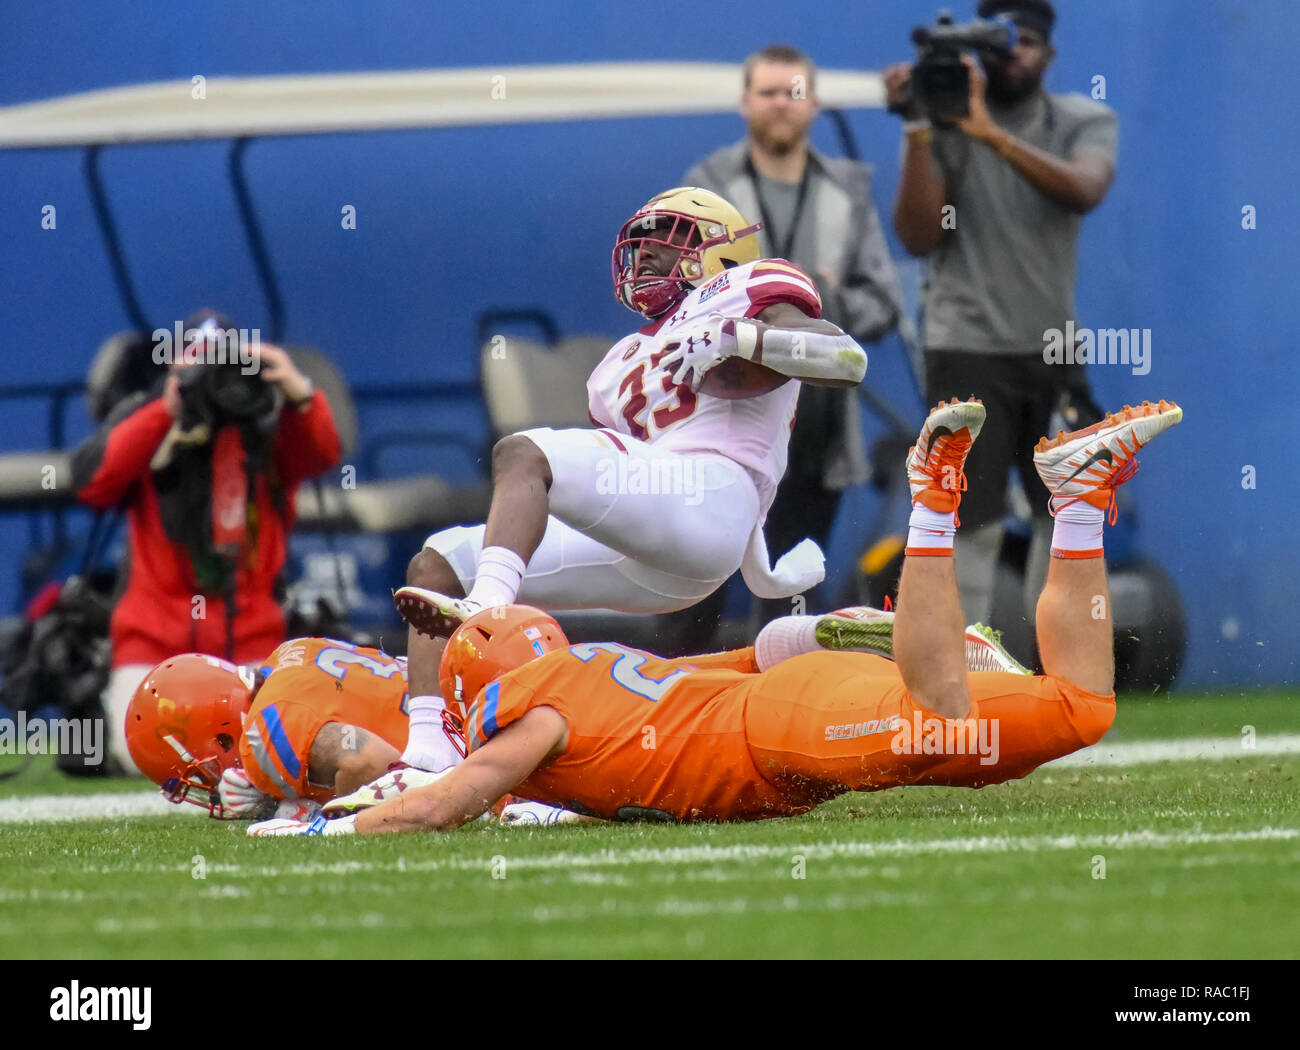 Dallas, TX, USA. 26th Dec, 2018. Boston College running back, Travis Levy (23), in action at the NCAA football First Responders Bowl game between the Boise State Broncos and the Boston College Eagles at the Cotton Bowl in Dallas, TX. (Absolute Complete Photographer & Company Credit: Joe Calomeni/MarinMedia.org/Cal Sport Media) Credit: csm/Alamy Live News Stock Photo